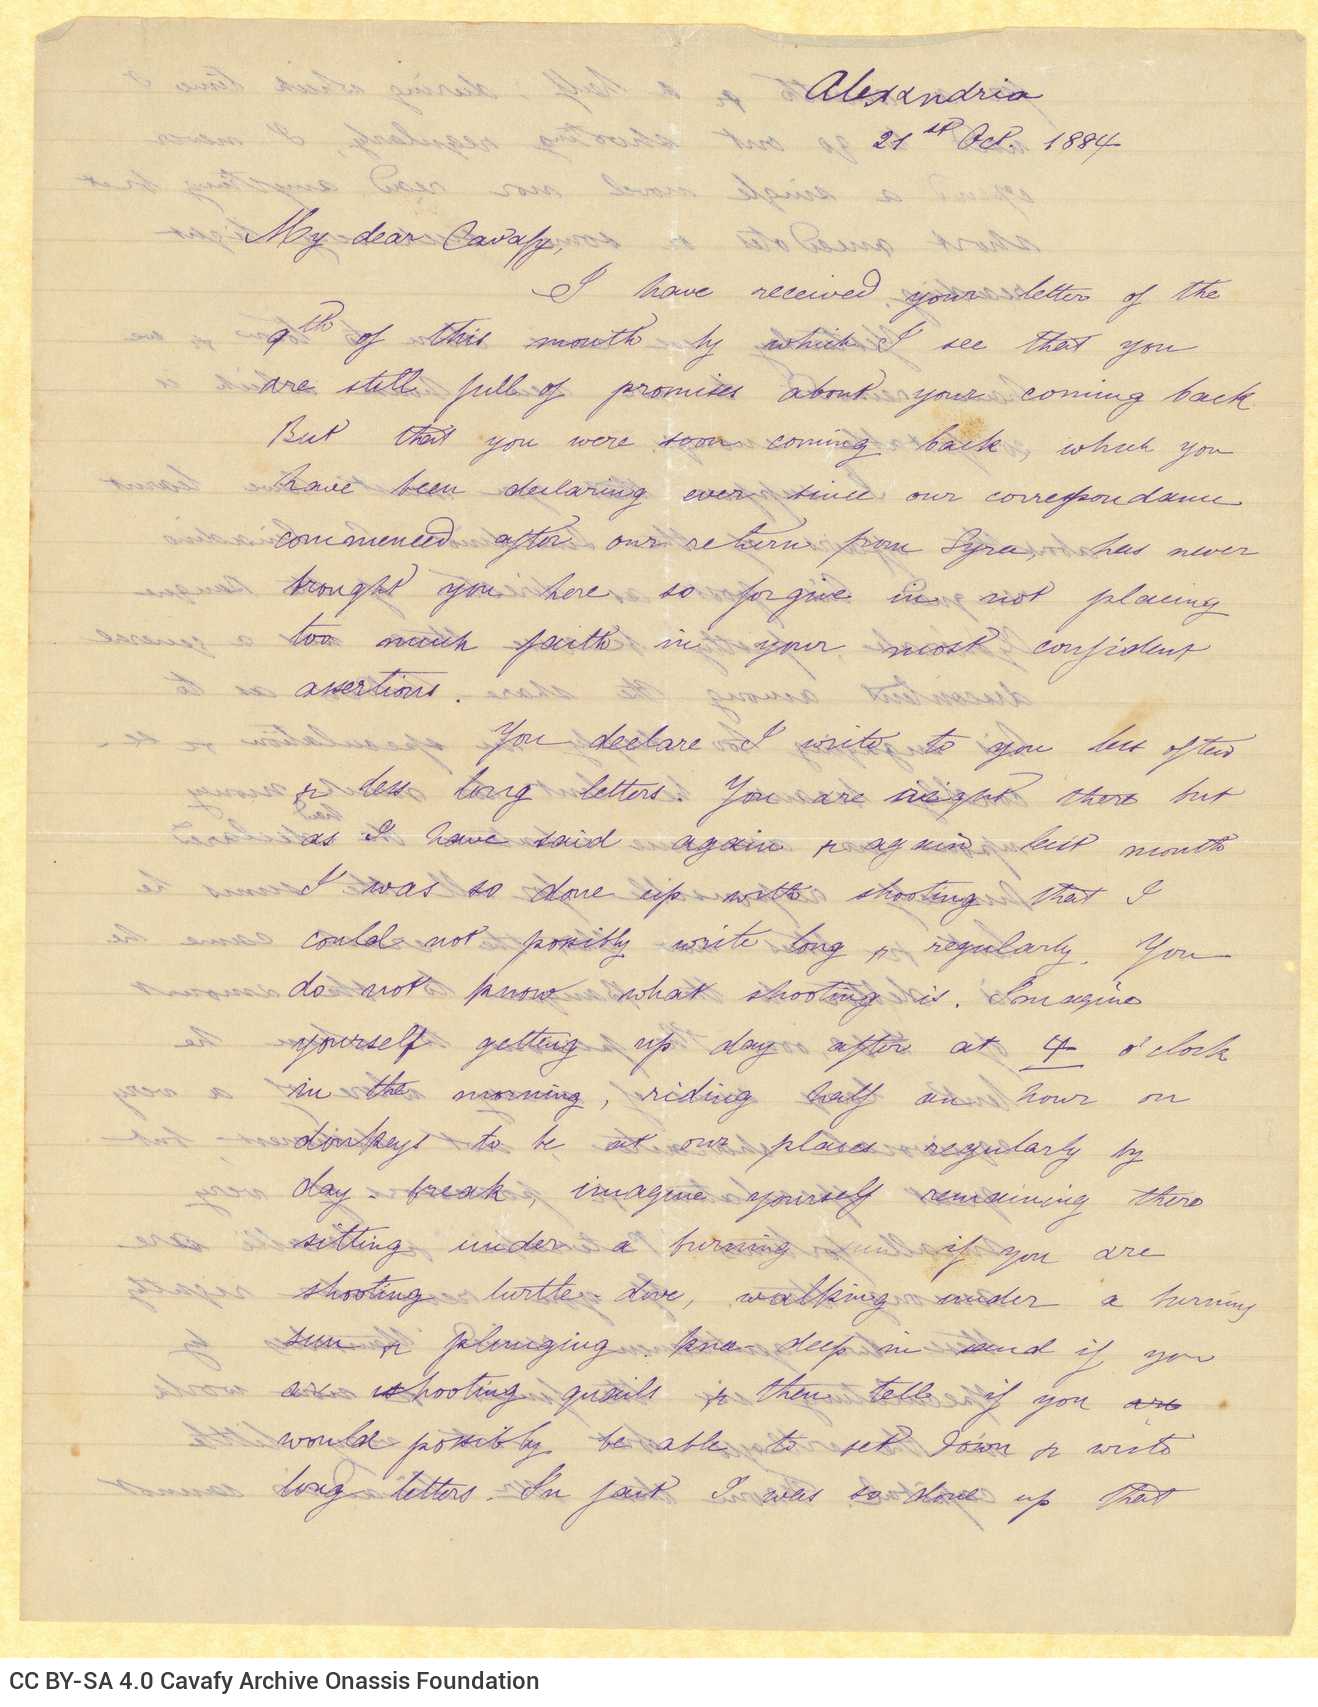 Handwritten letter by Mike Ralli to Cavafy in two sheets, with notes on all sides. It is a reply to a letter dated 9 October.